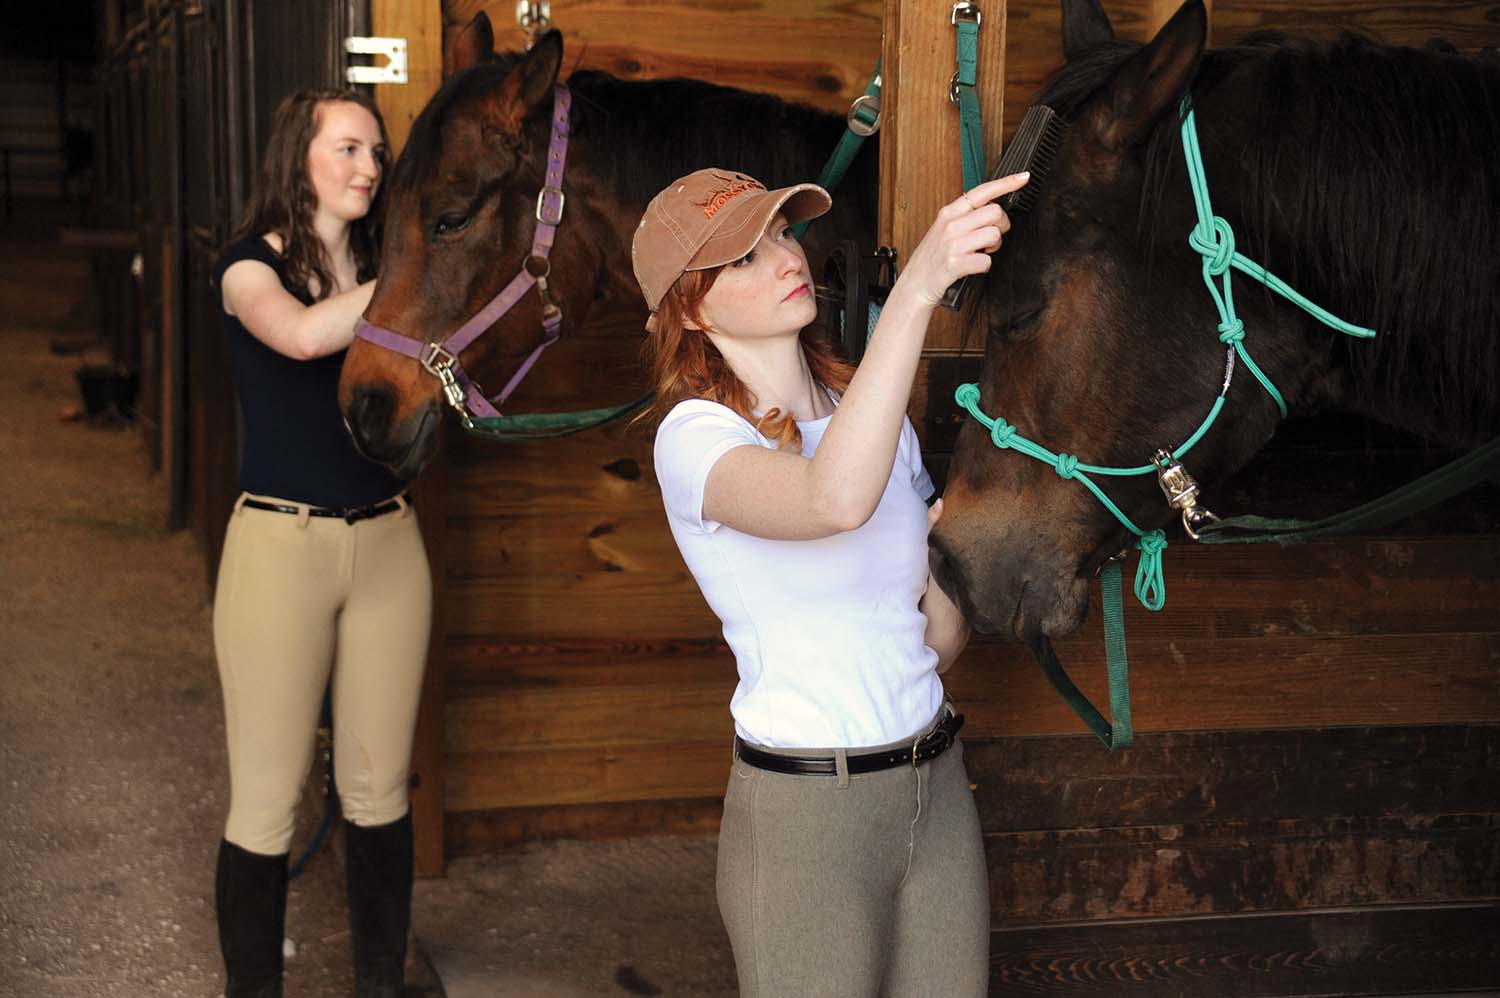 Kayla Clark and Julie Schlanz tend to their horses after their ride